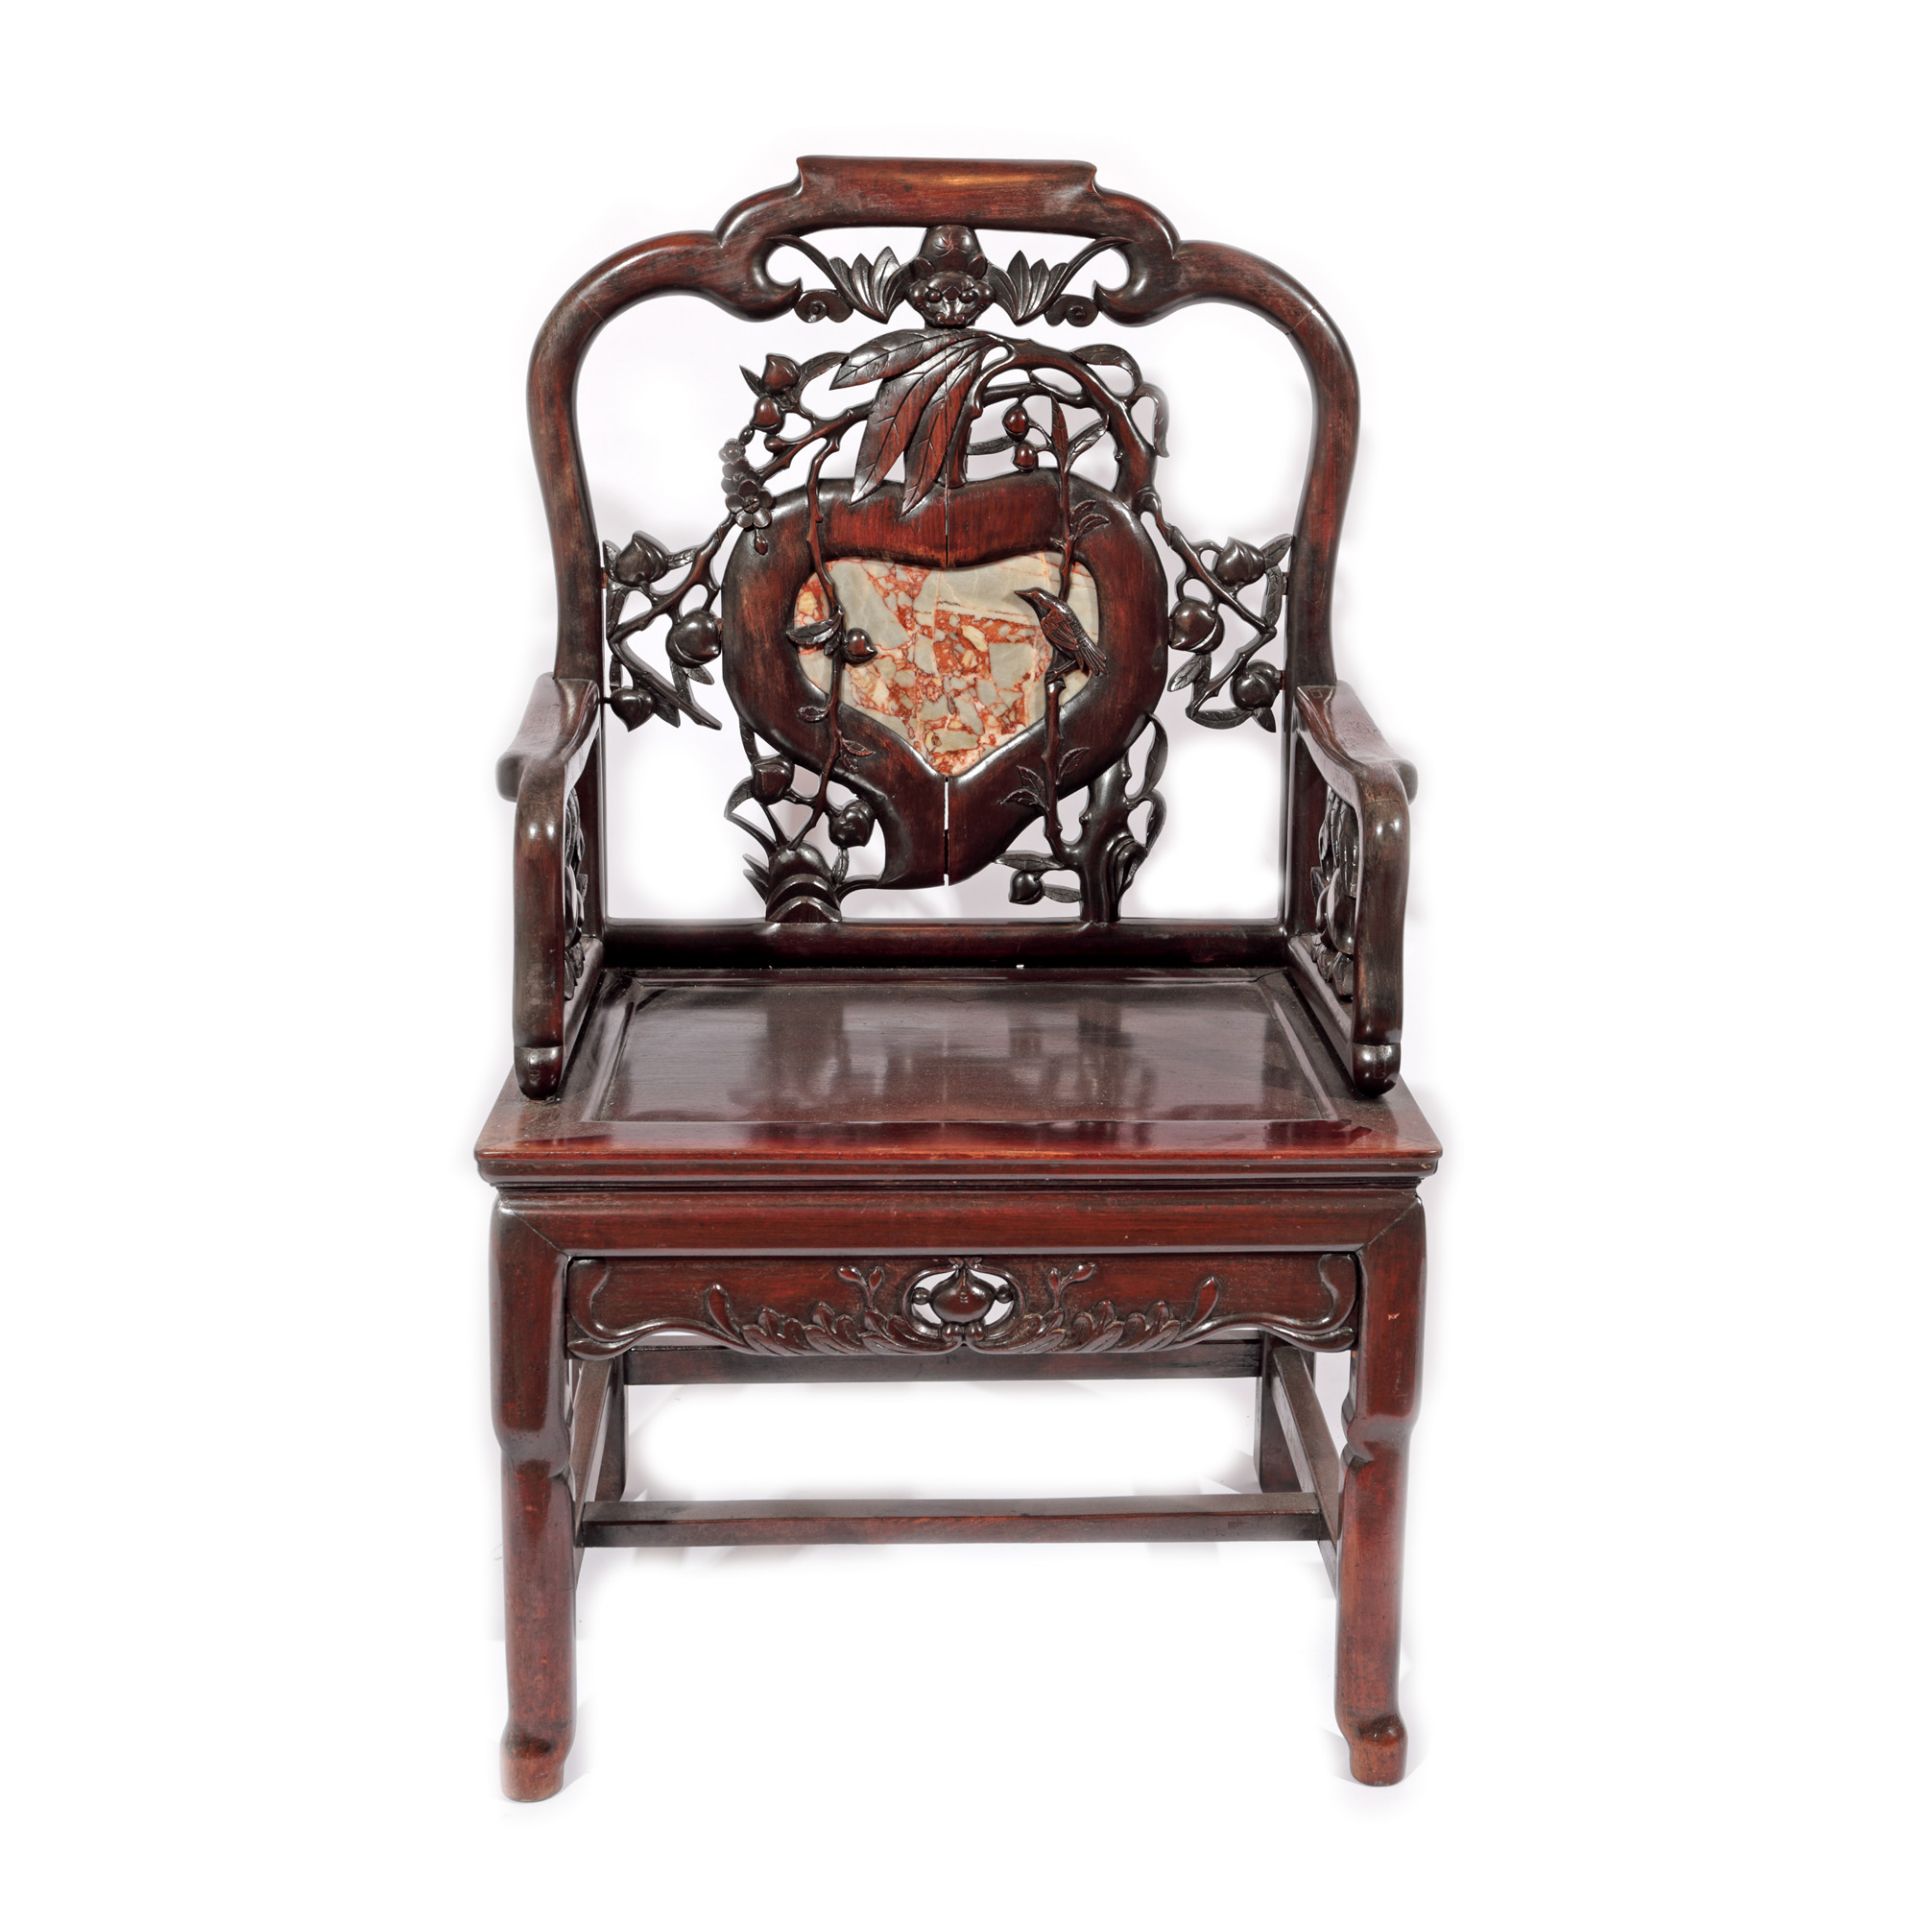 Exotic wooden armchair with marble appliqué, decorated with floral motifs, peaches and nightingales,